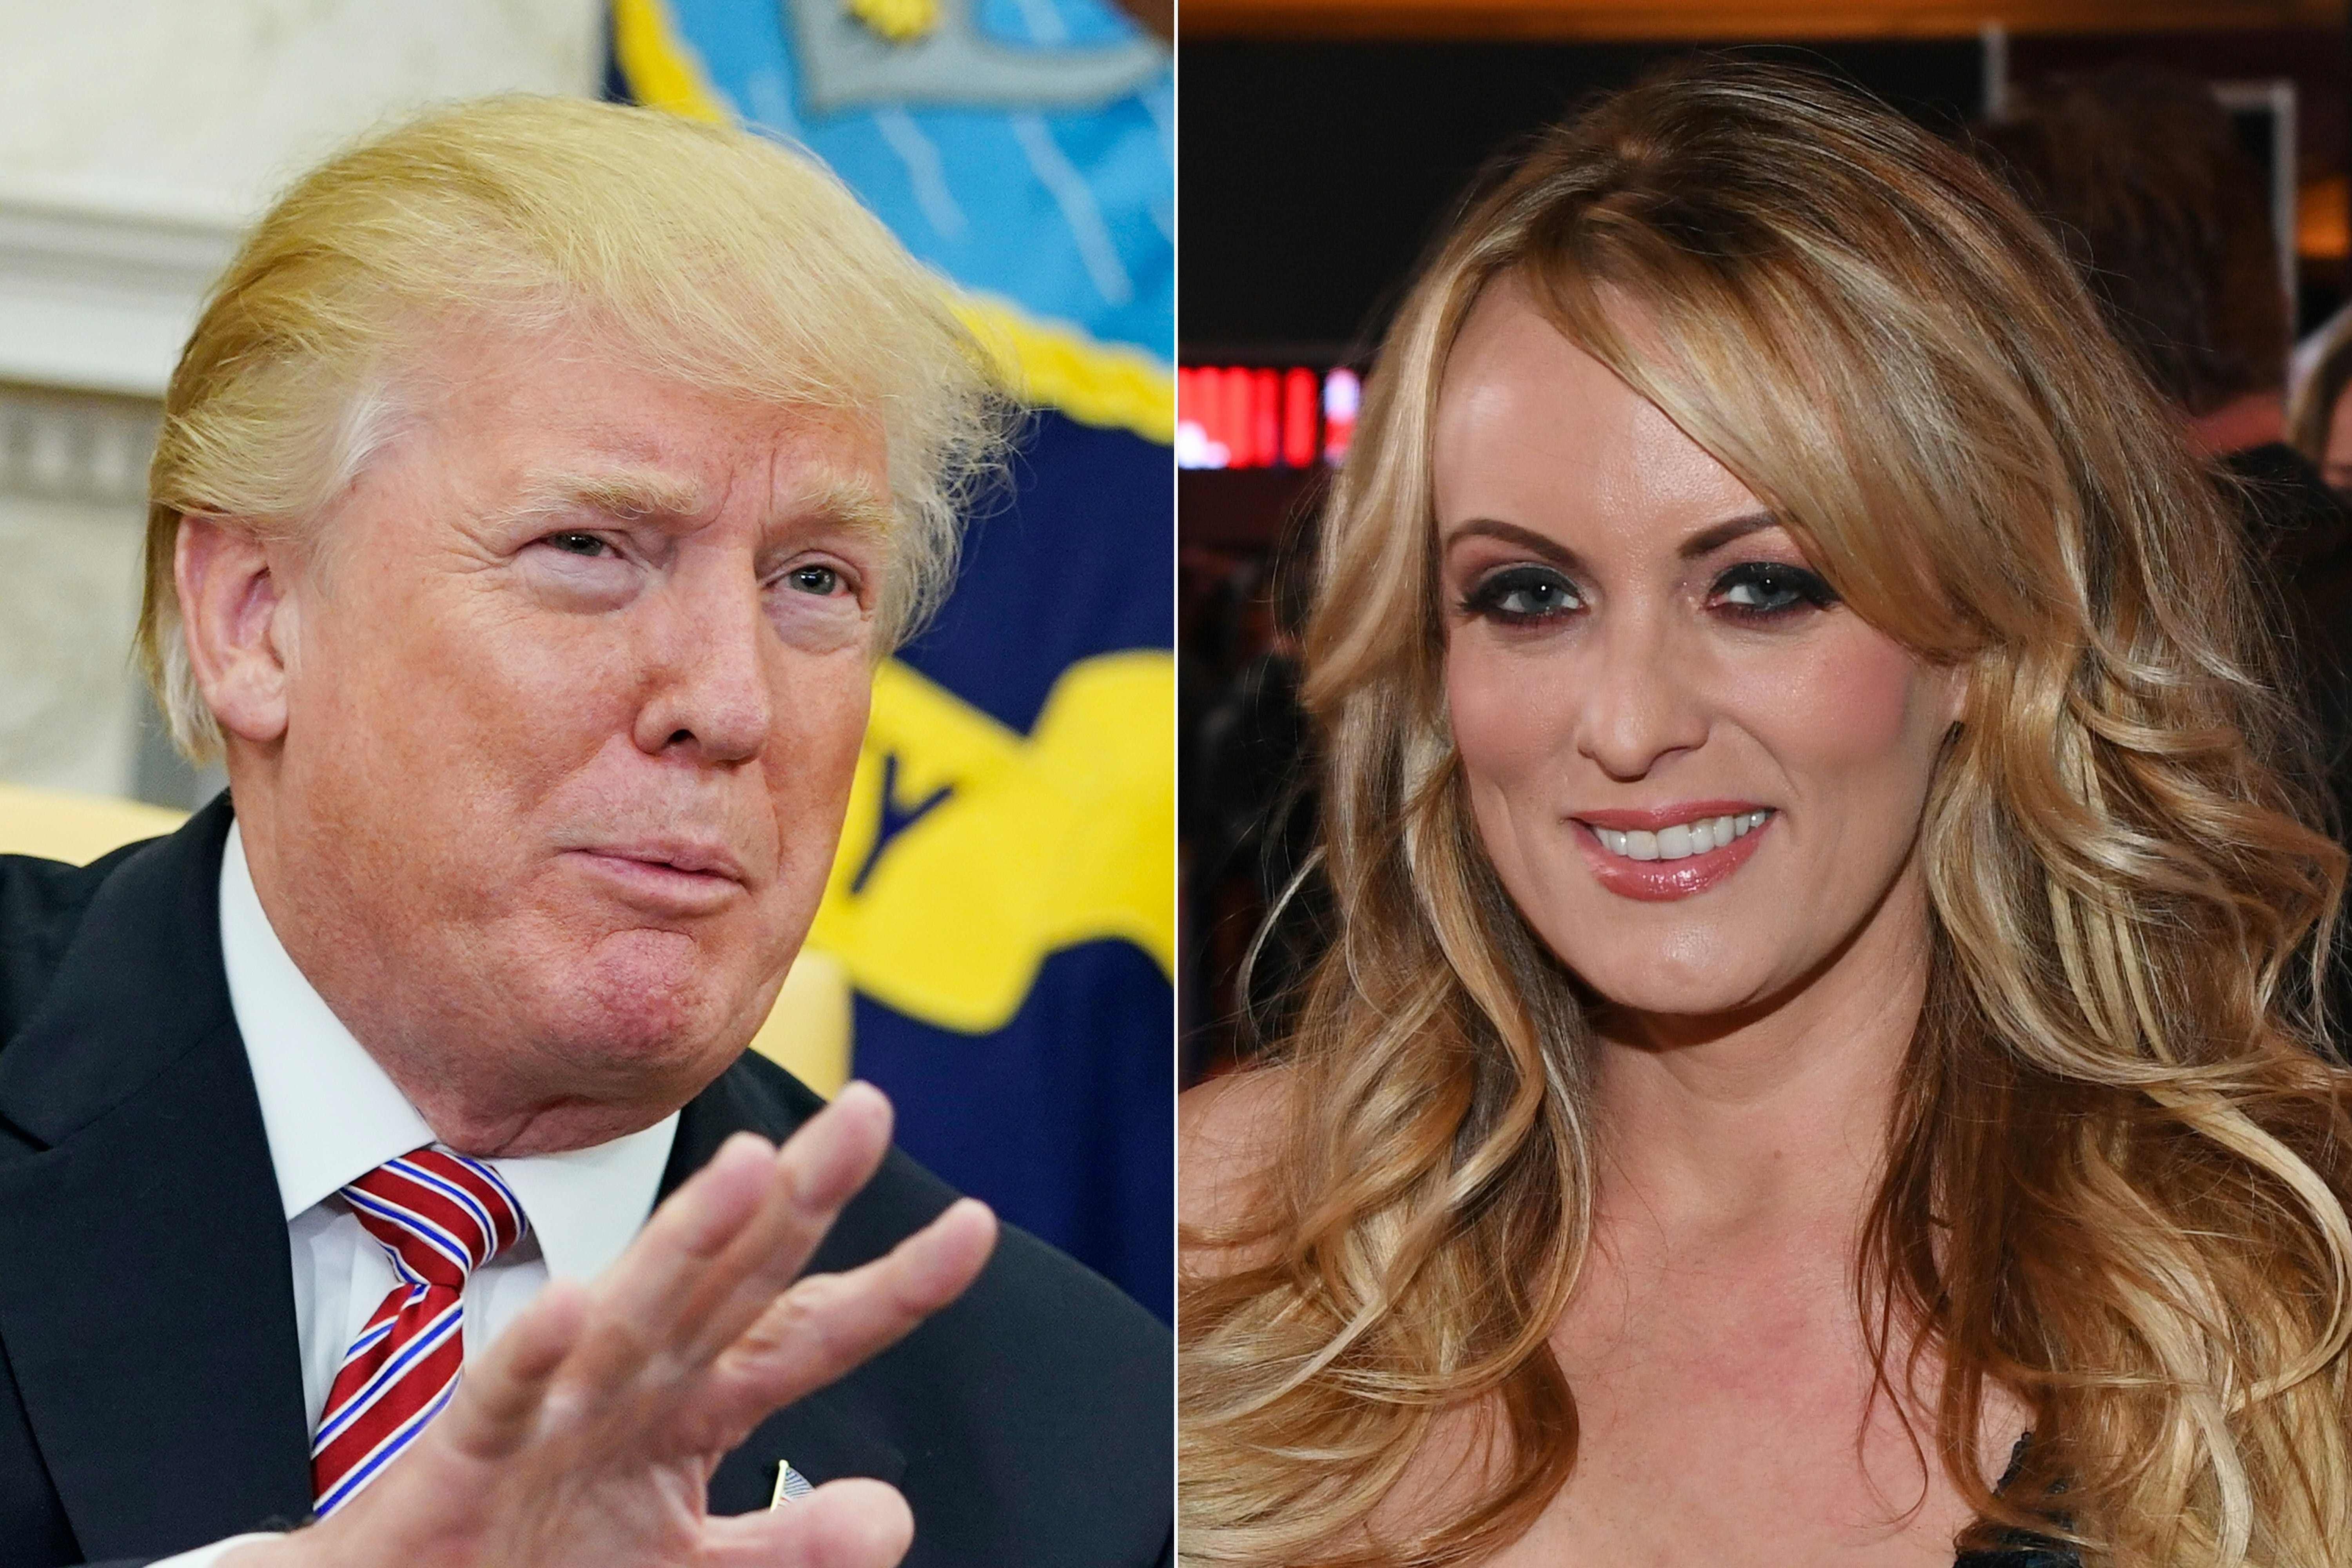 US President Donald Trump and adult film actress/director Stormy Daniels. Credits: AFP Photo